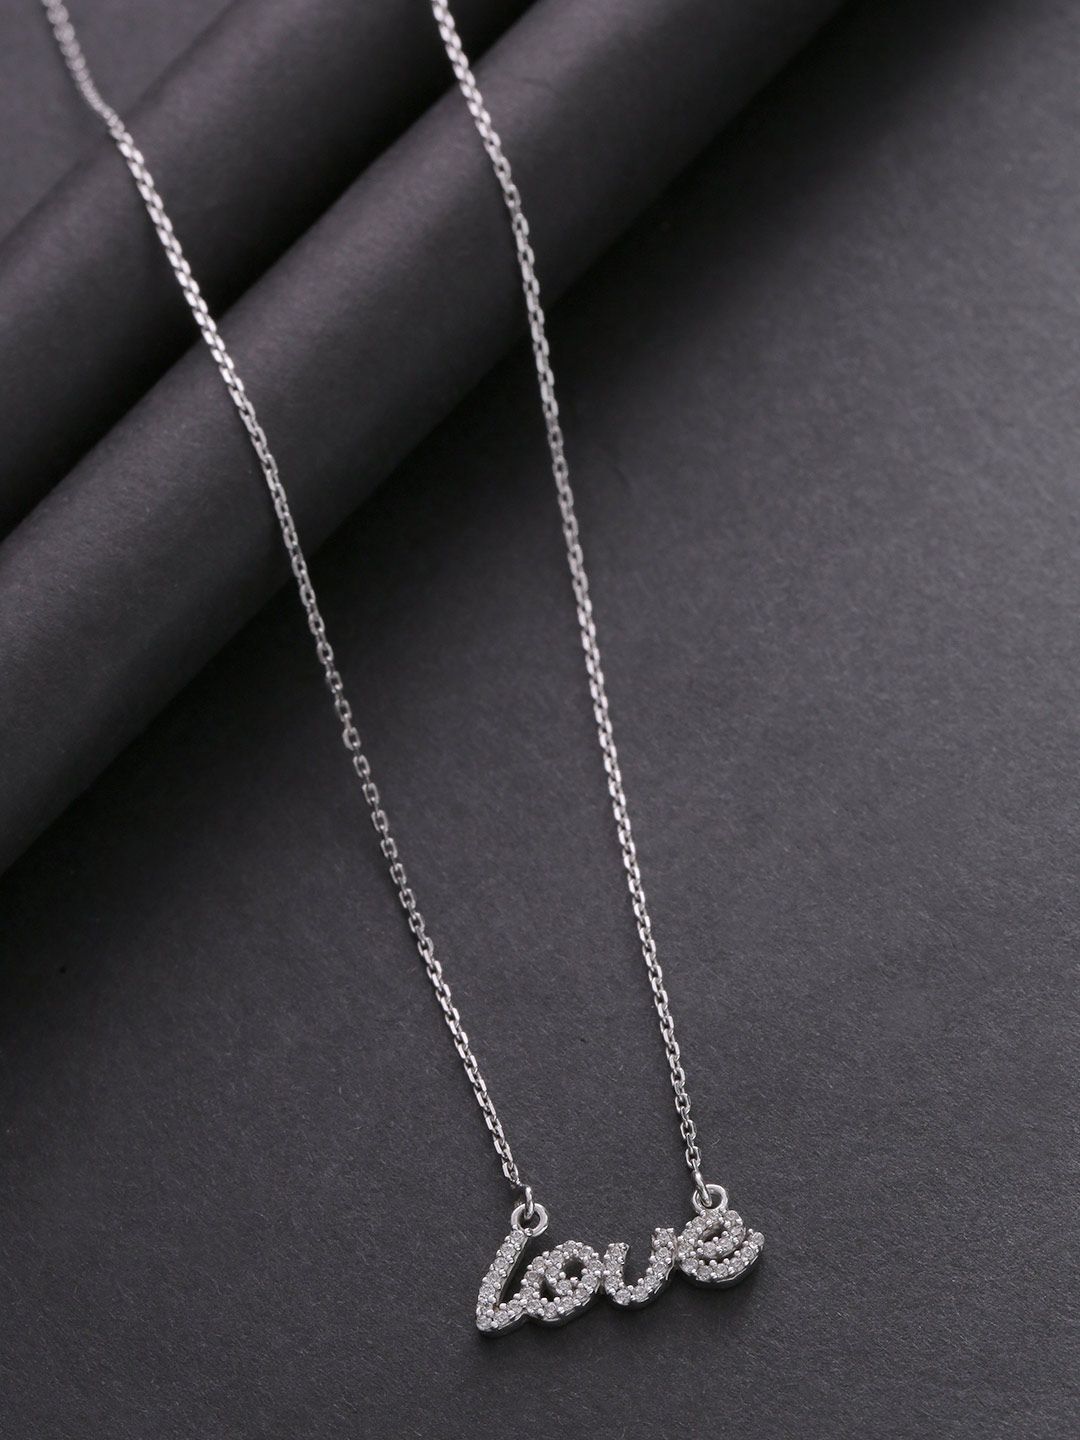 Carlton London Silver-Toned Rhodium-Plated CZ Stone-Studded Necklace Price in India